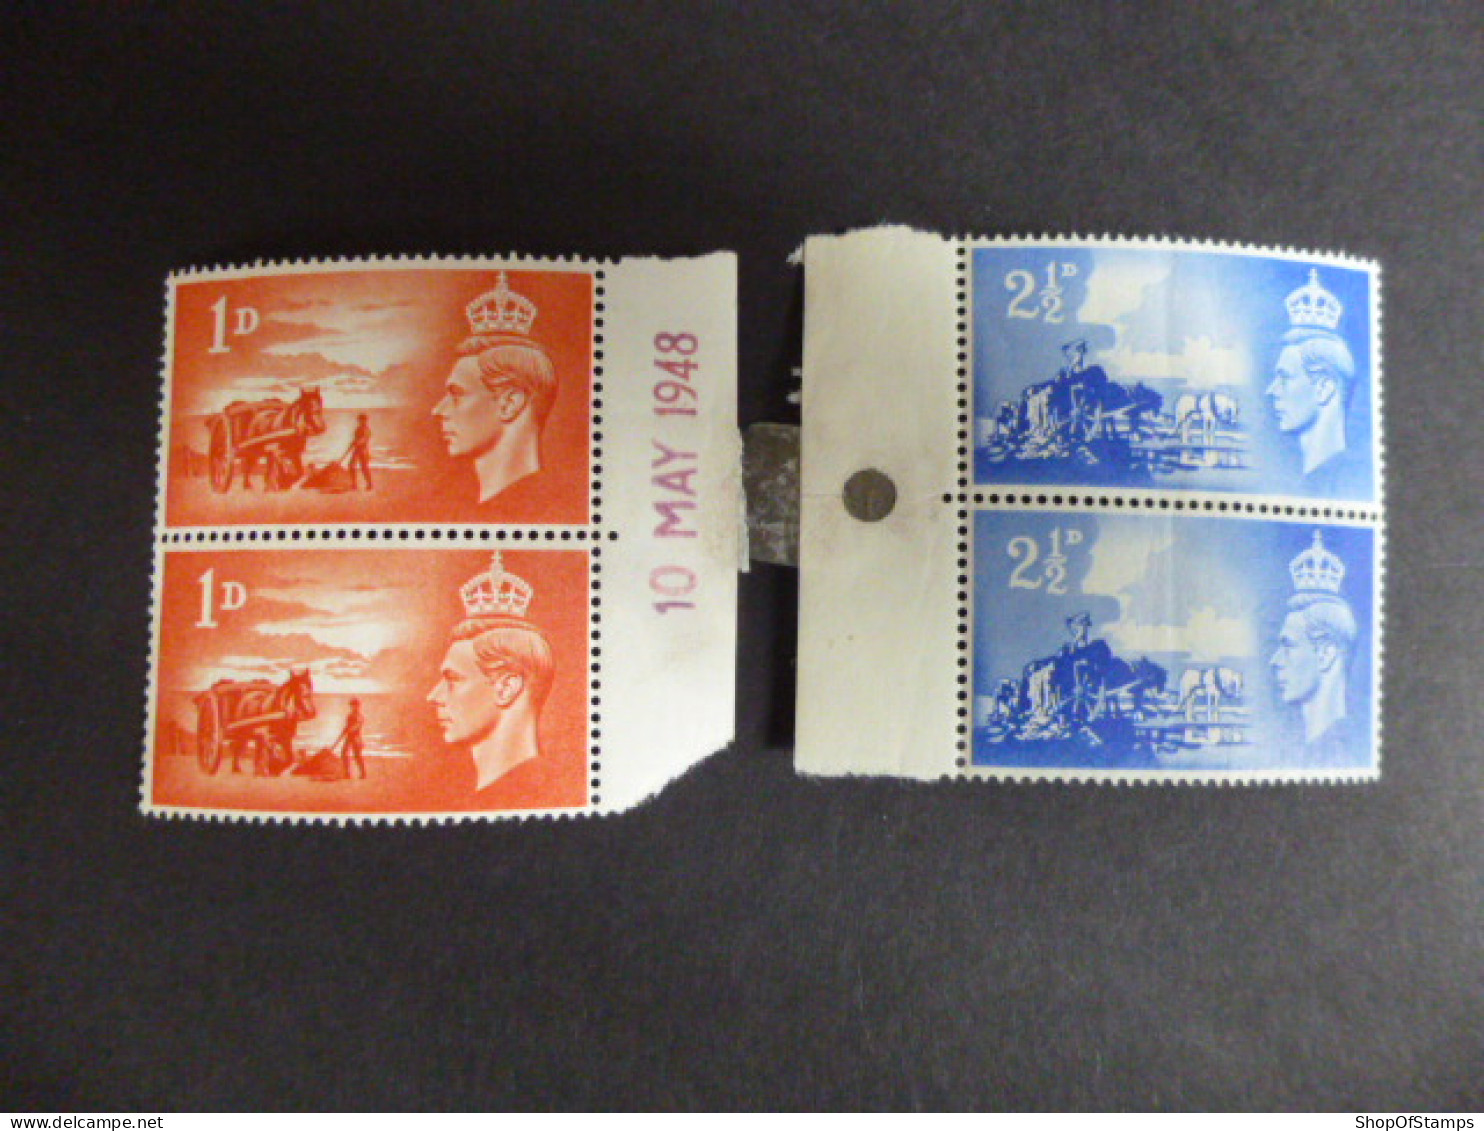 CHANNEL ISLANDS 01-02 MINT PAIR WITH ISSUE DATE STAMP - Sin Clasificación